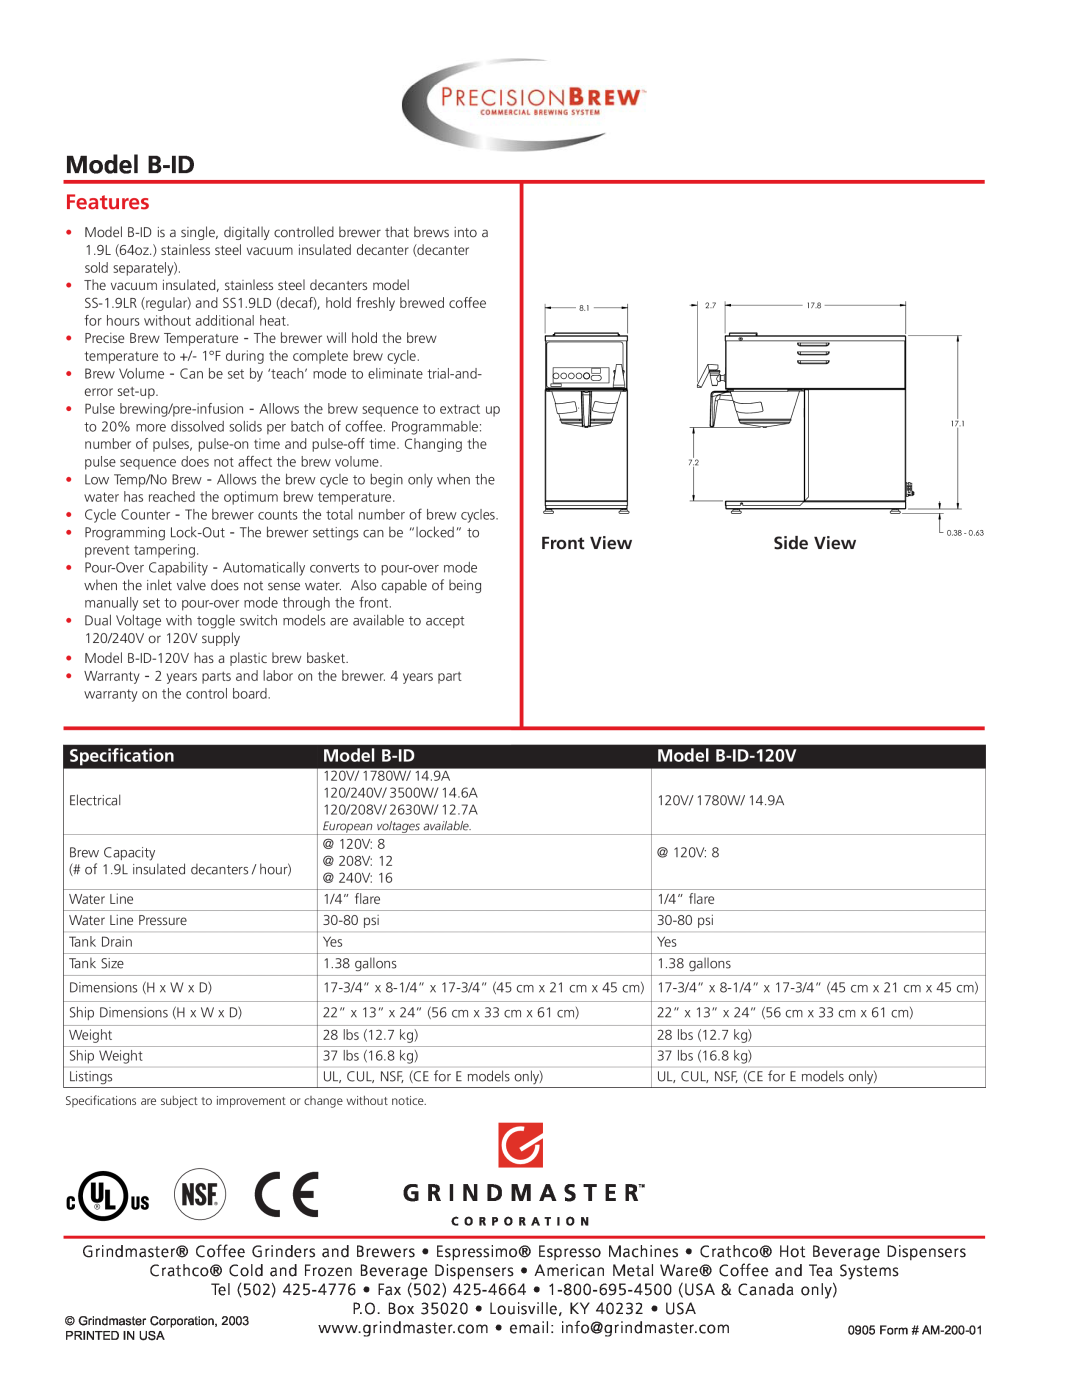 Grindmaster manual Features, Front View, Specification, Model B-ID-120V, Side View 